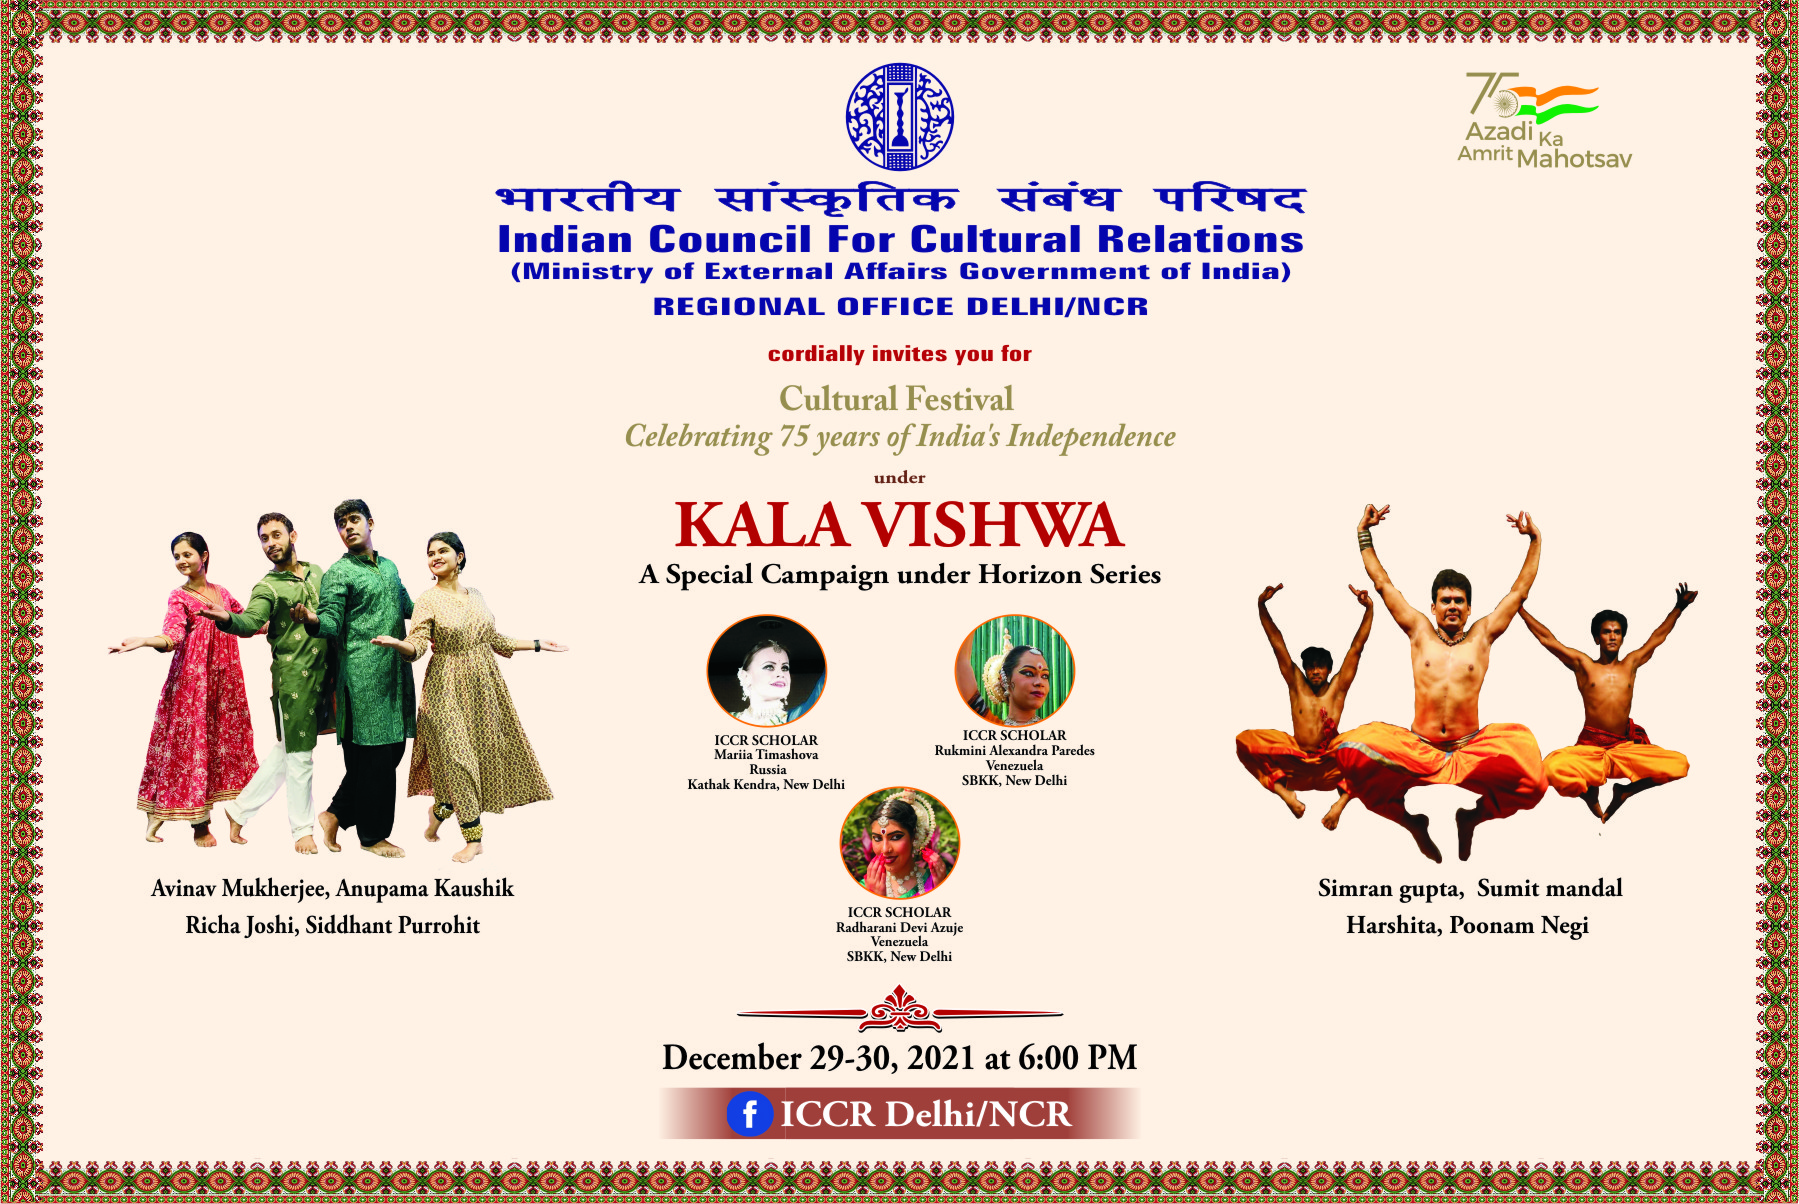 ICCR Regional Office (Delhi/NCR) is organizing a 2-Day ‘Cultural Event’ from December 29-30, 2021